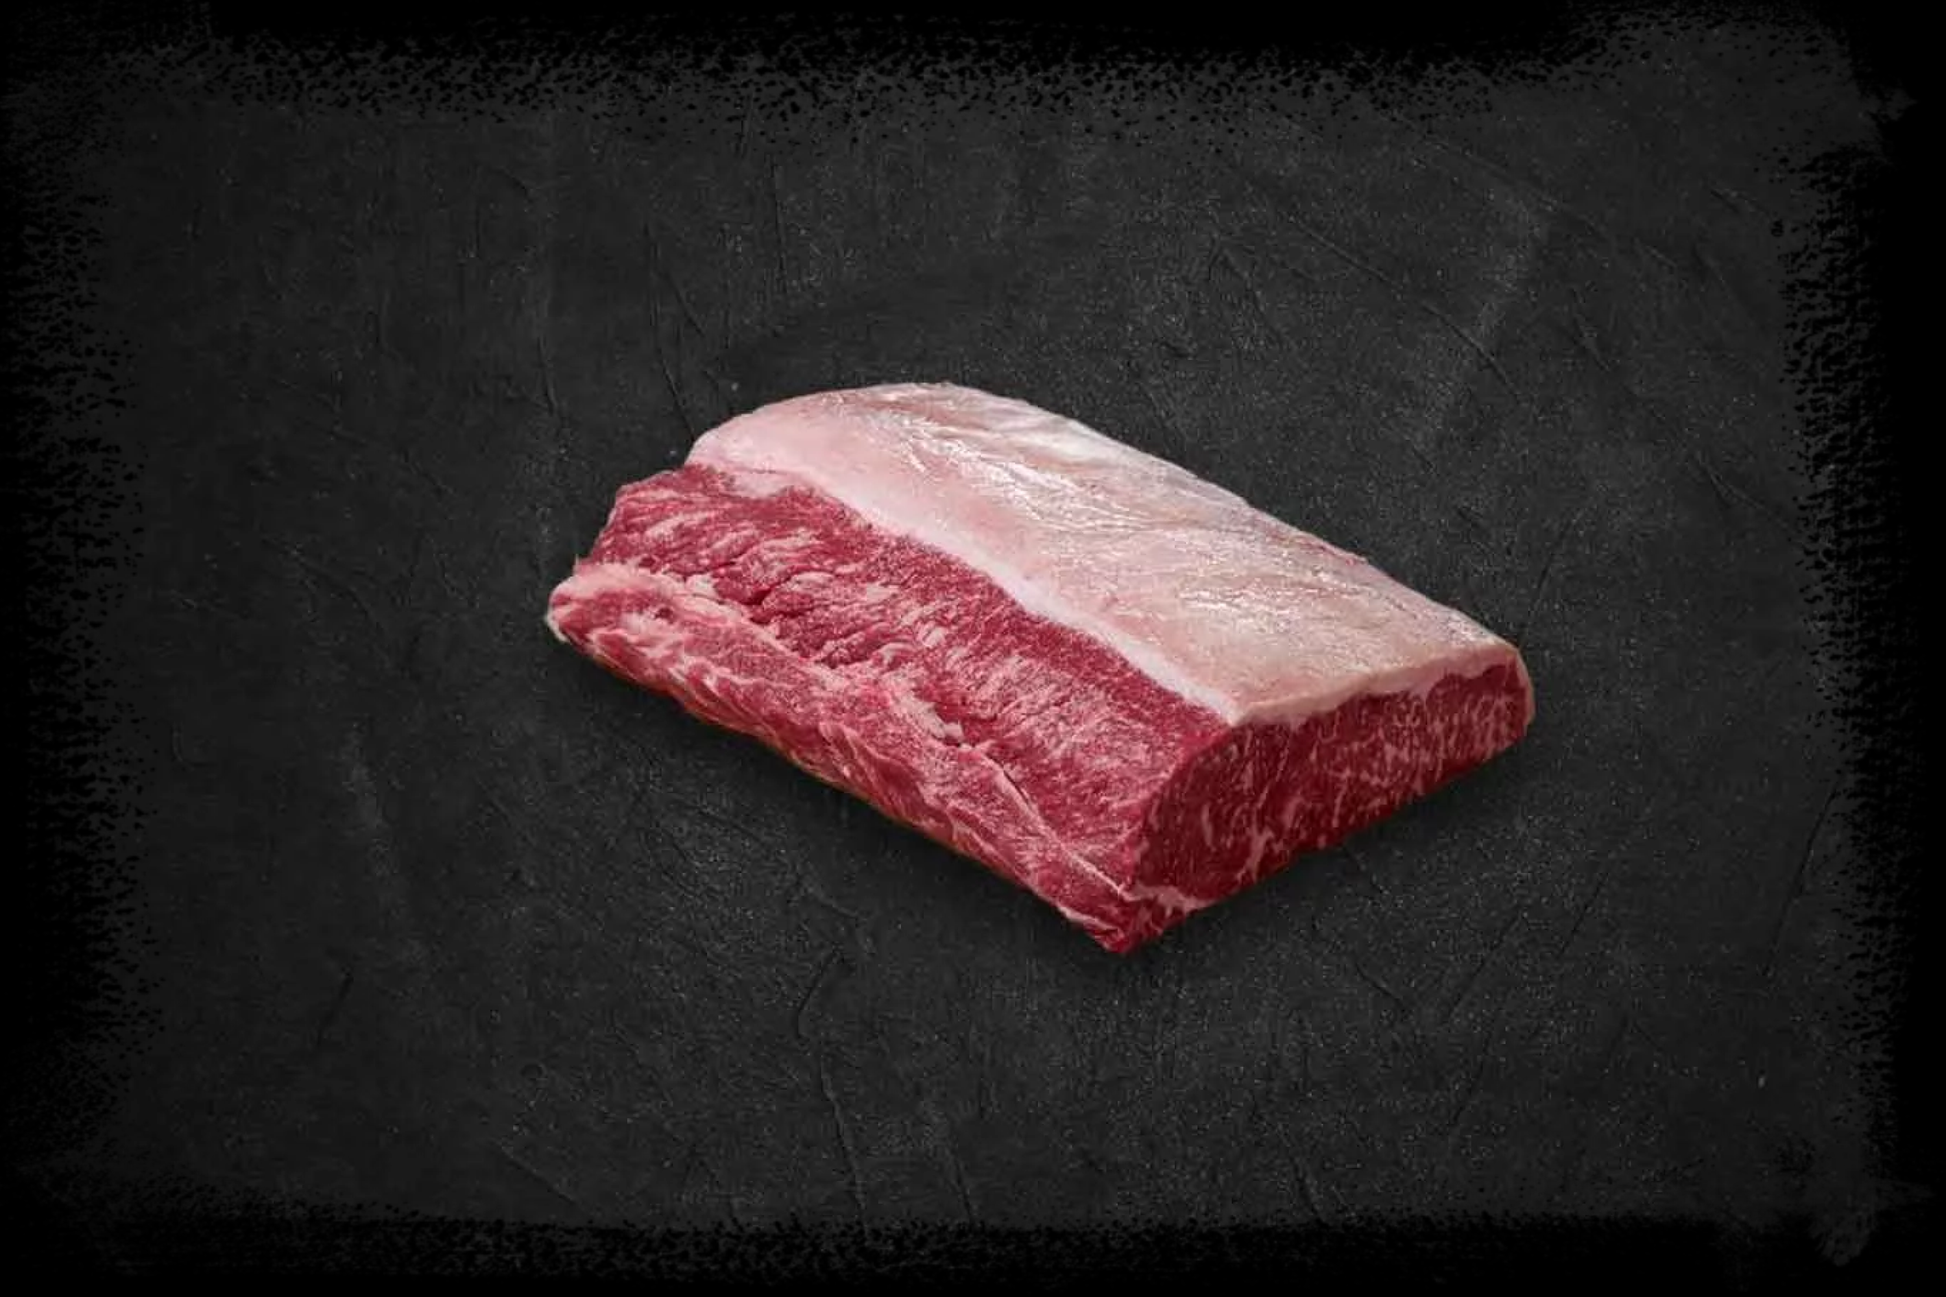 Grass-Fed Beef Striploin, Australia (Dhs 66.90/kg) - Chilled